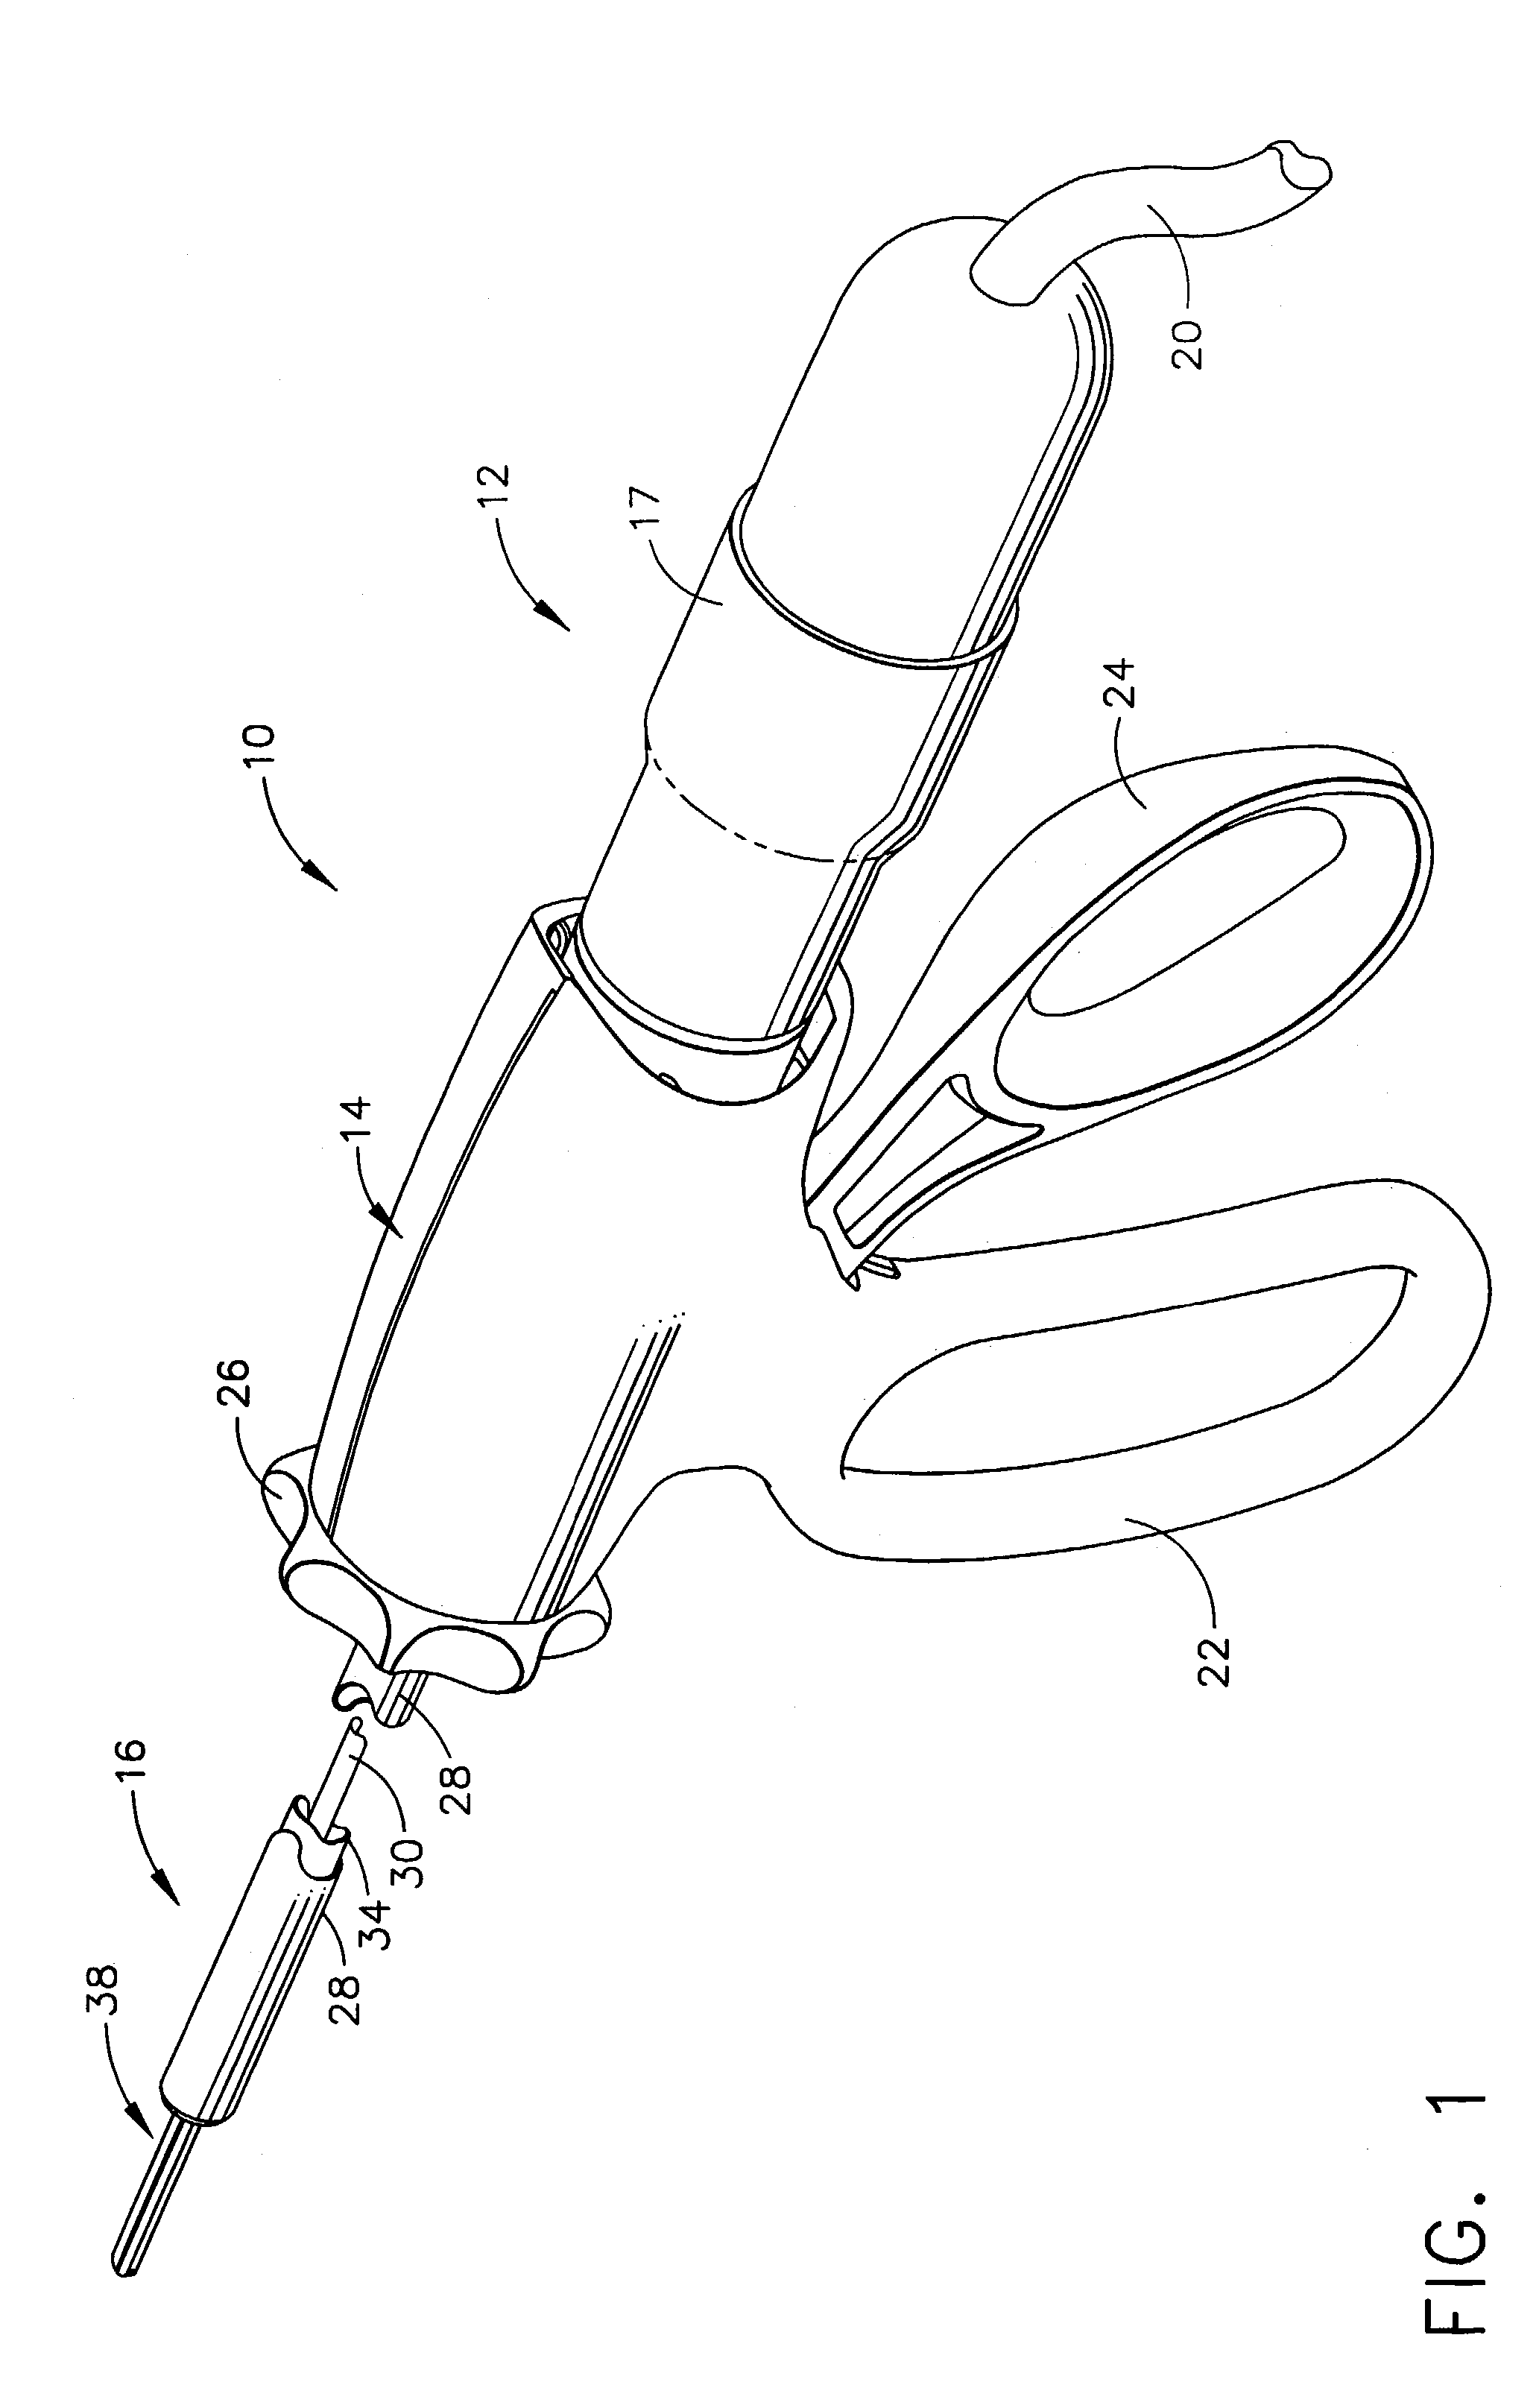 Articulating ultrasonic surgical shears